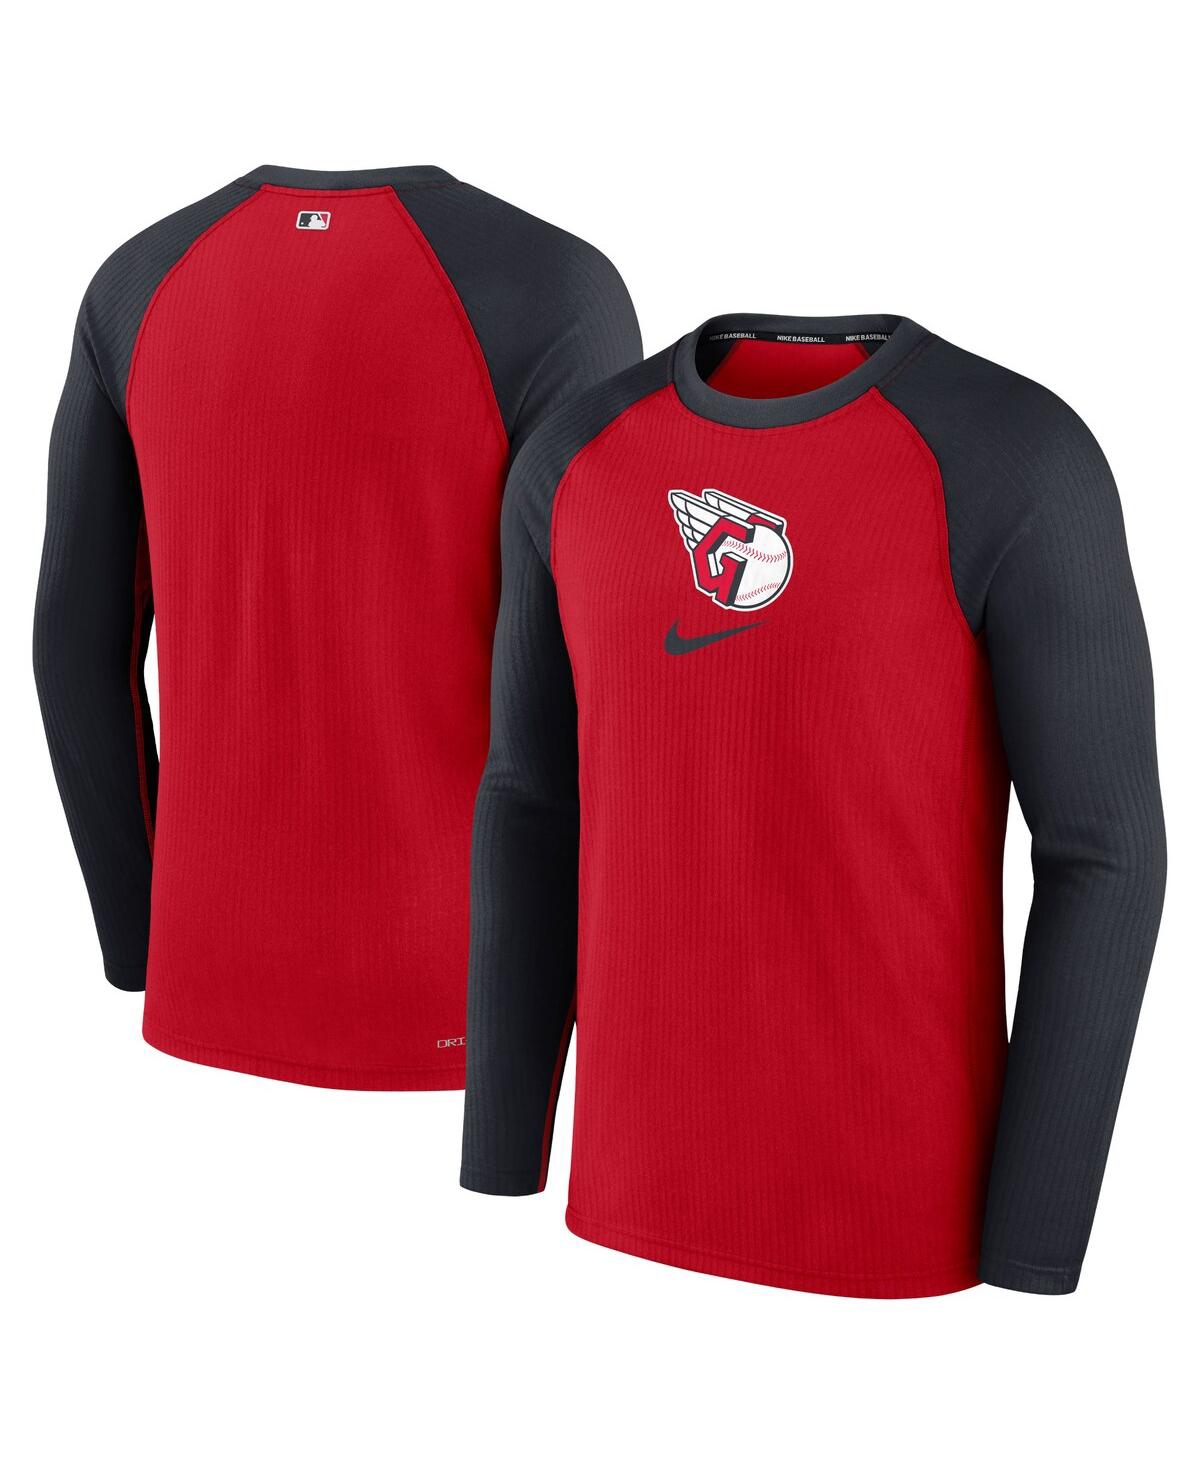 Shop Nike Men's  Red Cleveland Guardians Authentic Collection Game Raglan Performance Long Sleeve T-shirt